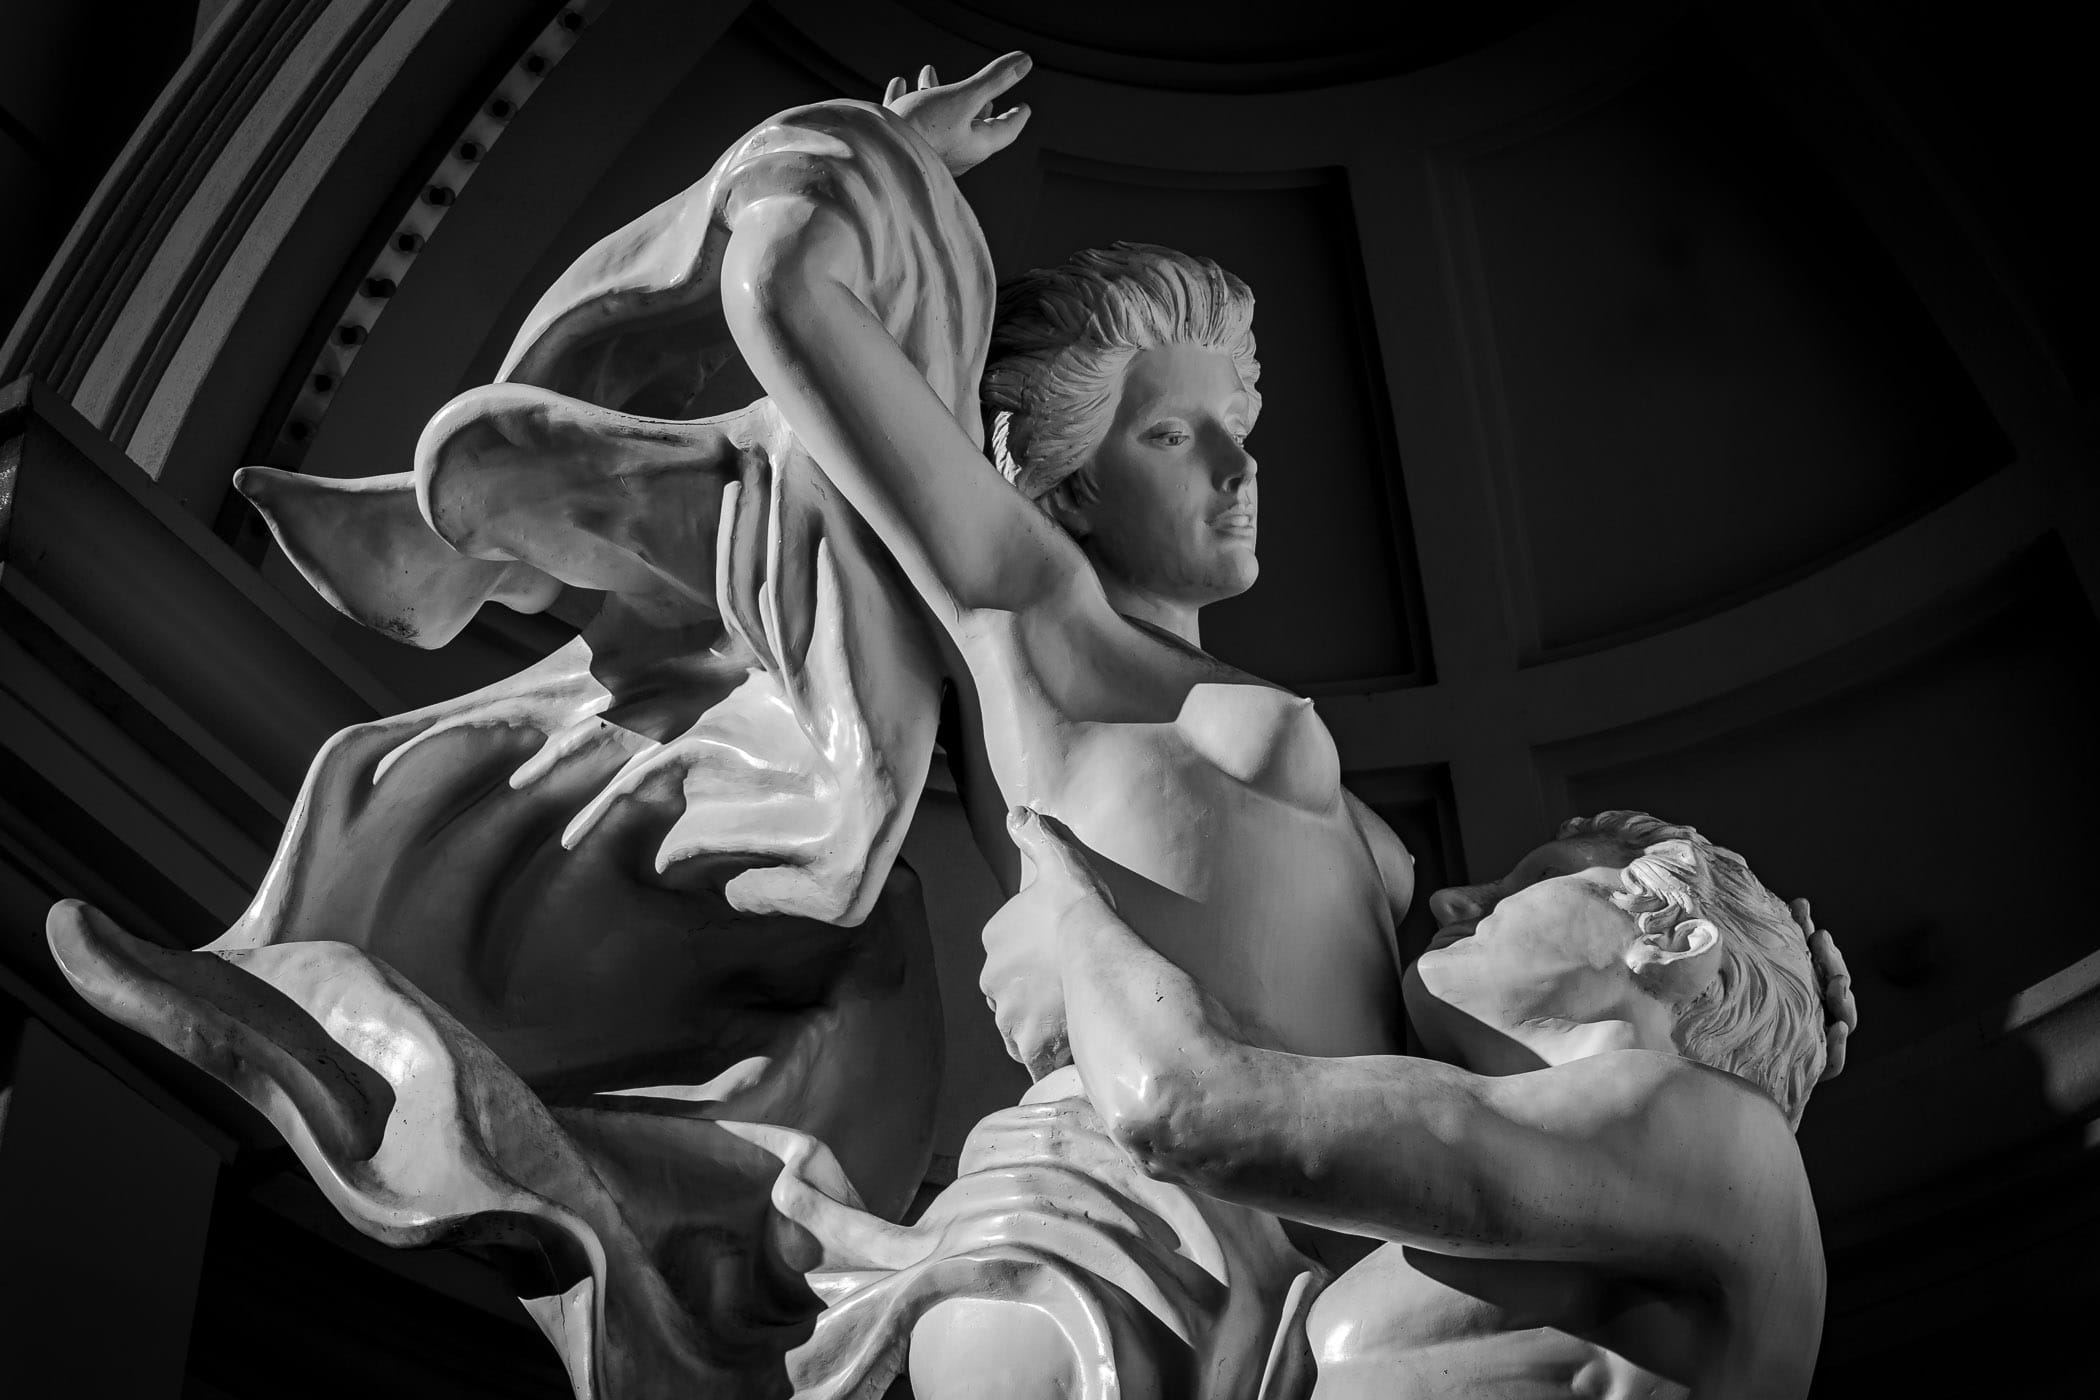 A statue depicting The Rape of the Sabine Women at Monte Carlo Casino and Hotel, Las Vegas.